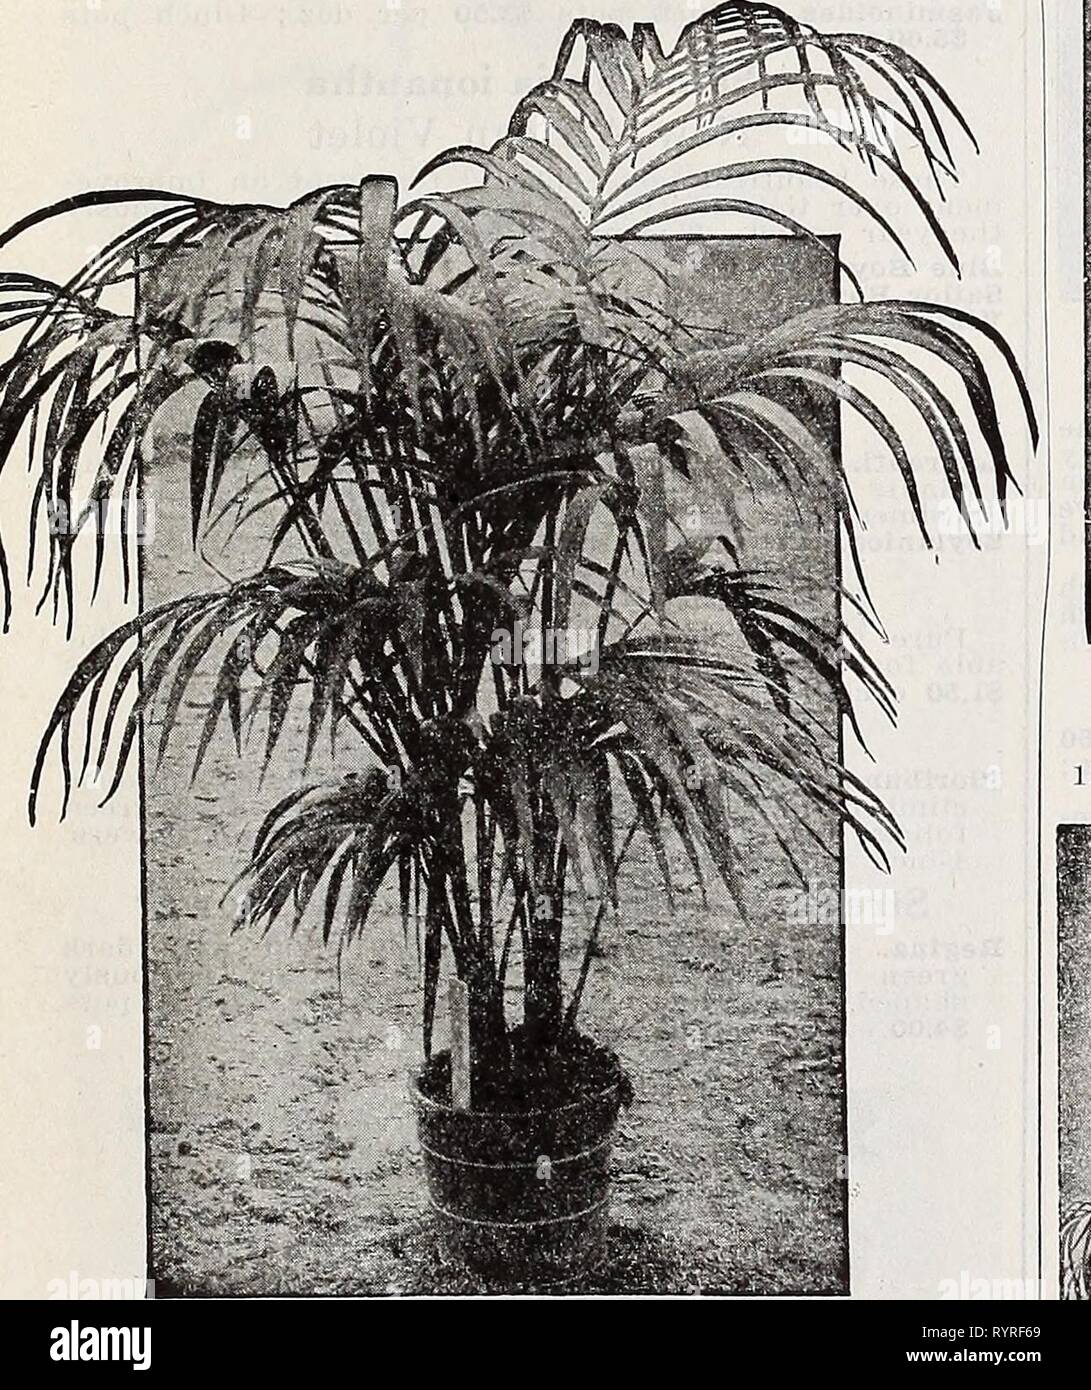 Dreer's wholesale catalog for florists Dreer's wholesale catalog for florists : autumn 1938 edition . dreerswholesalec1938henr Year: 1938  m ENRY A. DREER PALMS WHOLESALE CATALOG One of Our Leading Specialties Measurements of Palms as g'iven are from the top of pot or tub to top of plant in natural position. Areca lutescens 3-inch pots, bushy plants, 12 to 15 inches high $3.50 per doz.; $25.00 per 100. 4-lnch pots 60c each. 6-inch pots $2.00 each. 7-inch tubs, $4.00 each. Cocos Weddelliana 3-inch pots $4.50 per doz.; $35.00 per 100. Single Kentia Belmoreana 214-inch pots $3.00 per doz.; $20.00 Stock Photo